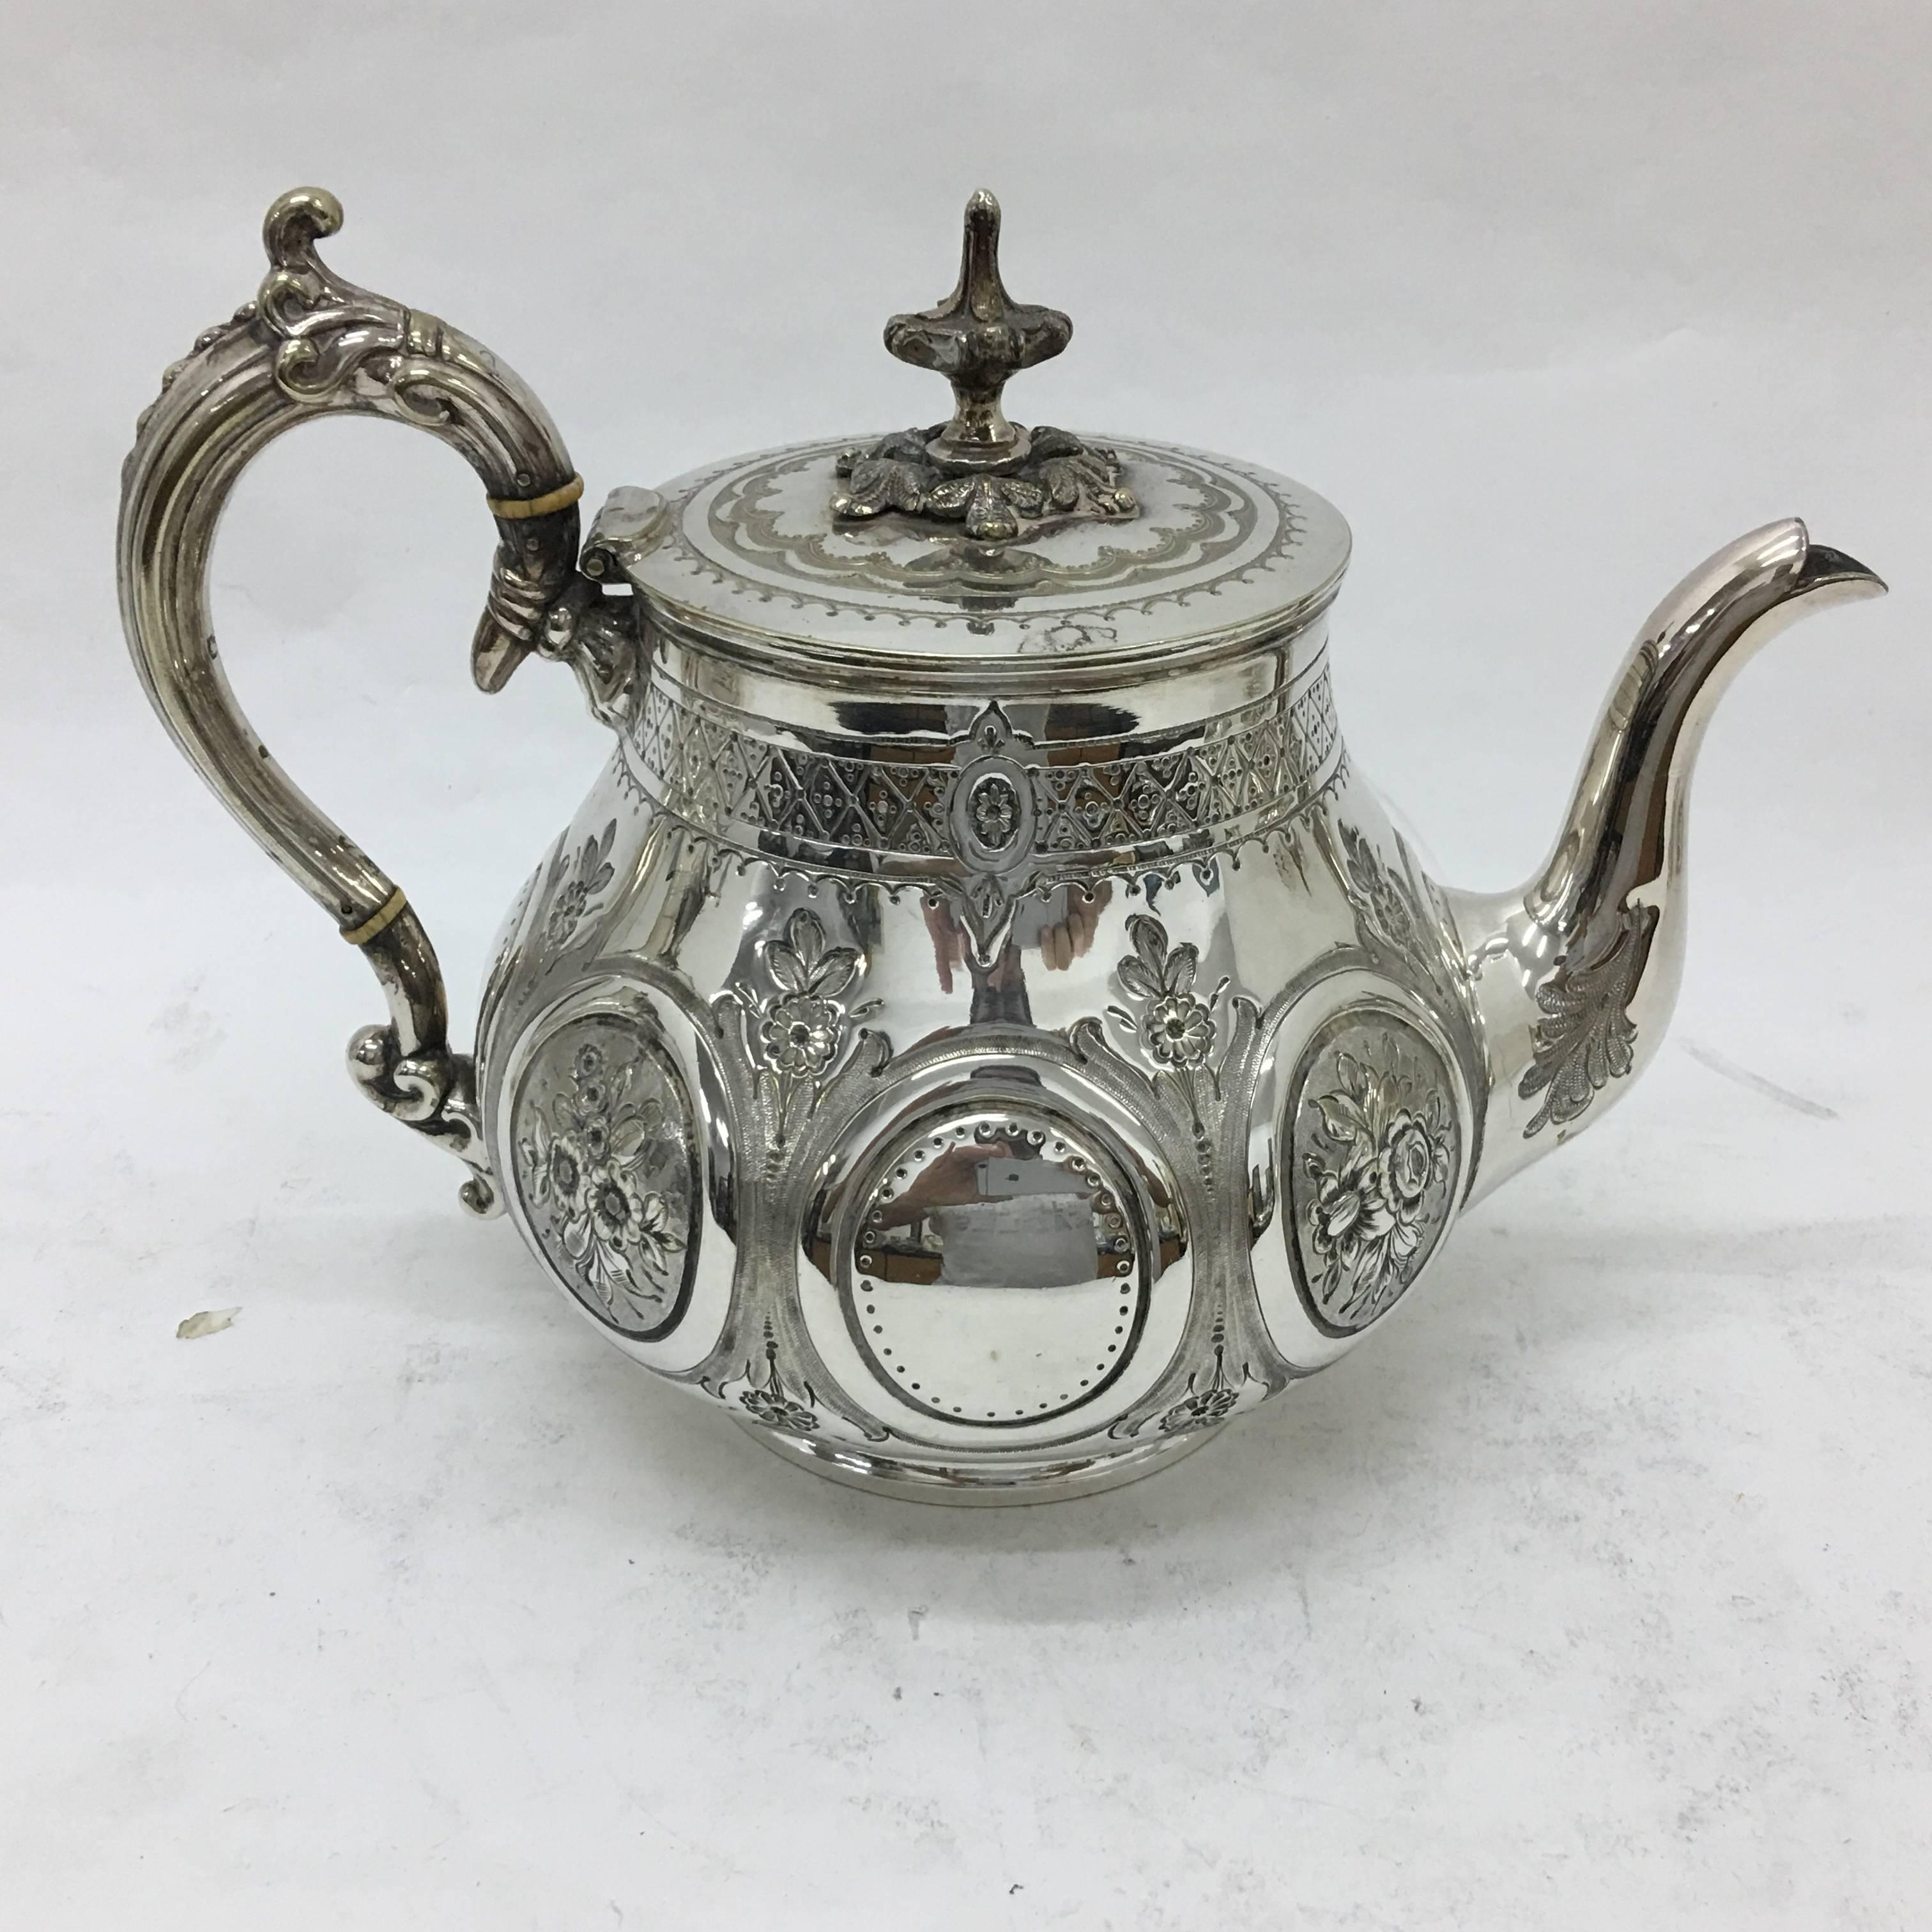 Victorian Engraved Silver Plated British Tea Set by Wilkinson 1870 4